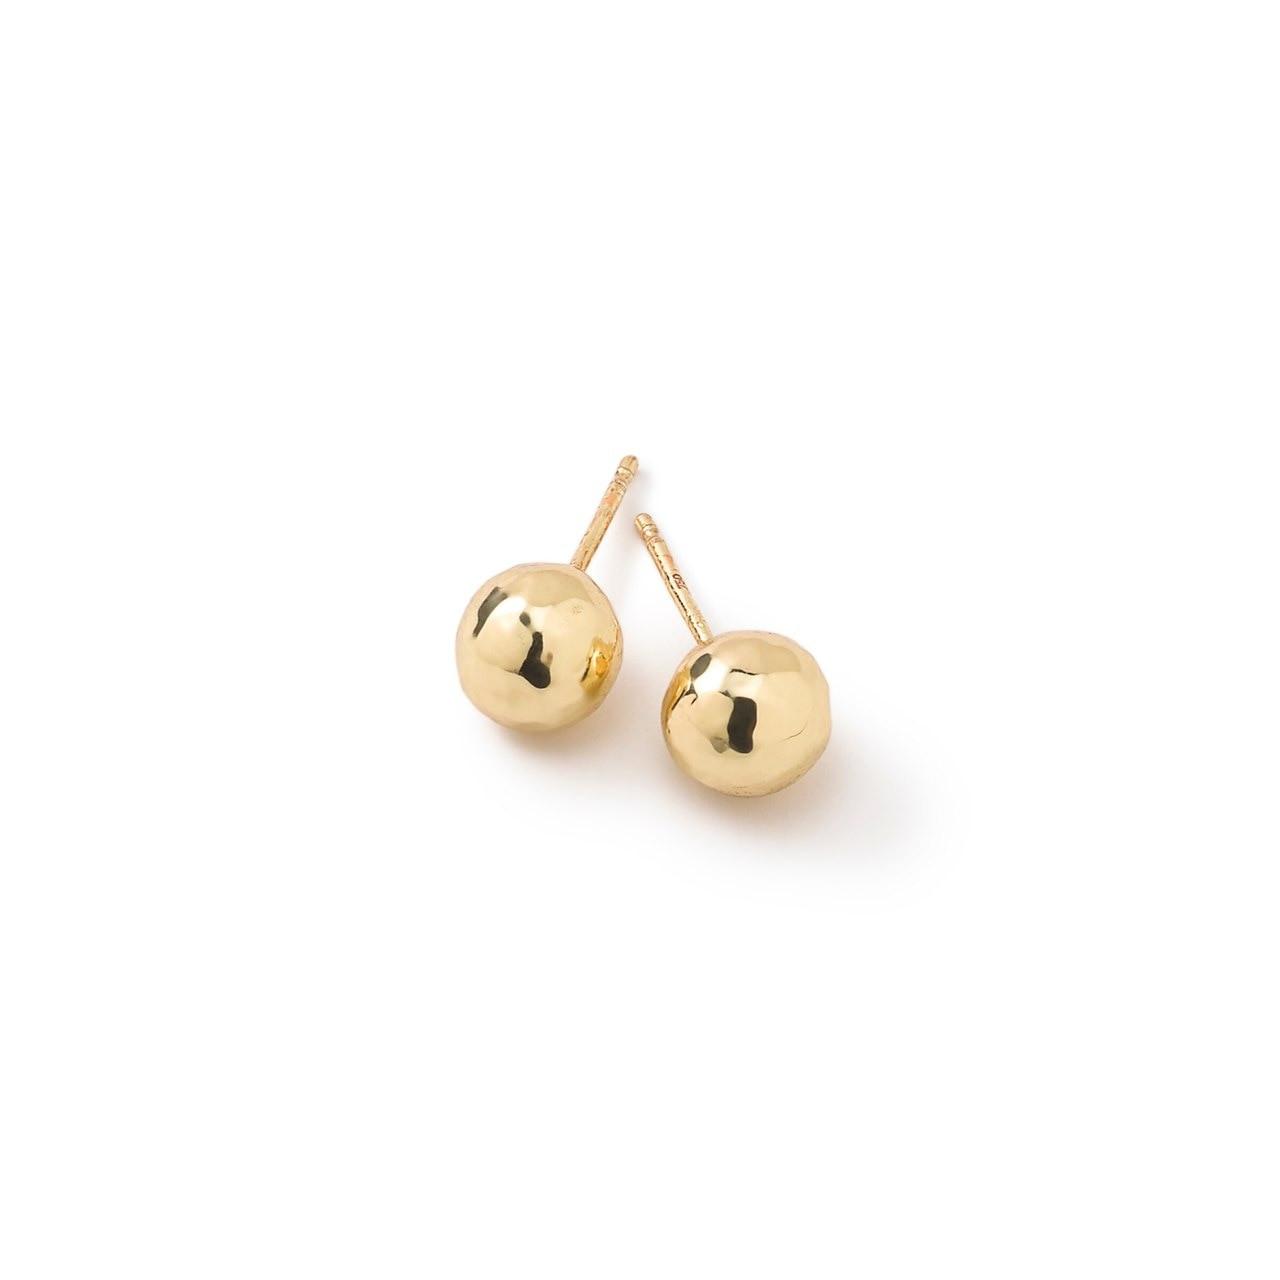 Ippolita Classico Small Hammered Ball Earrings in 18k Yellow Gold